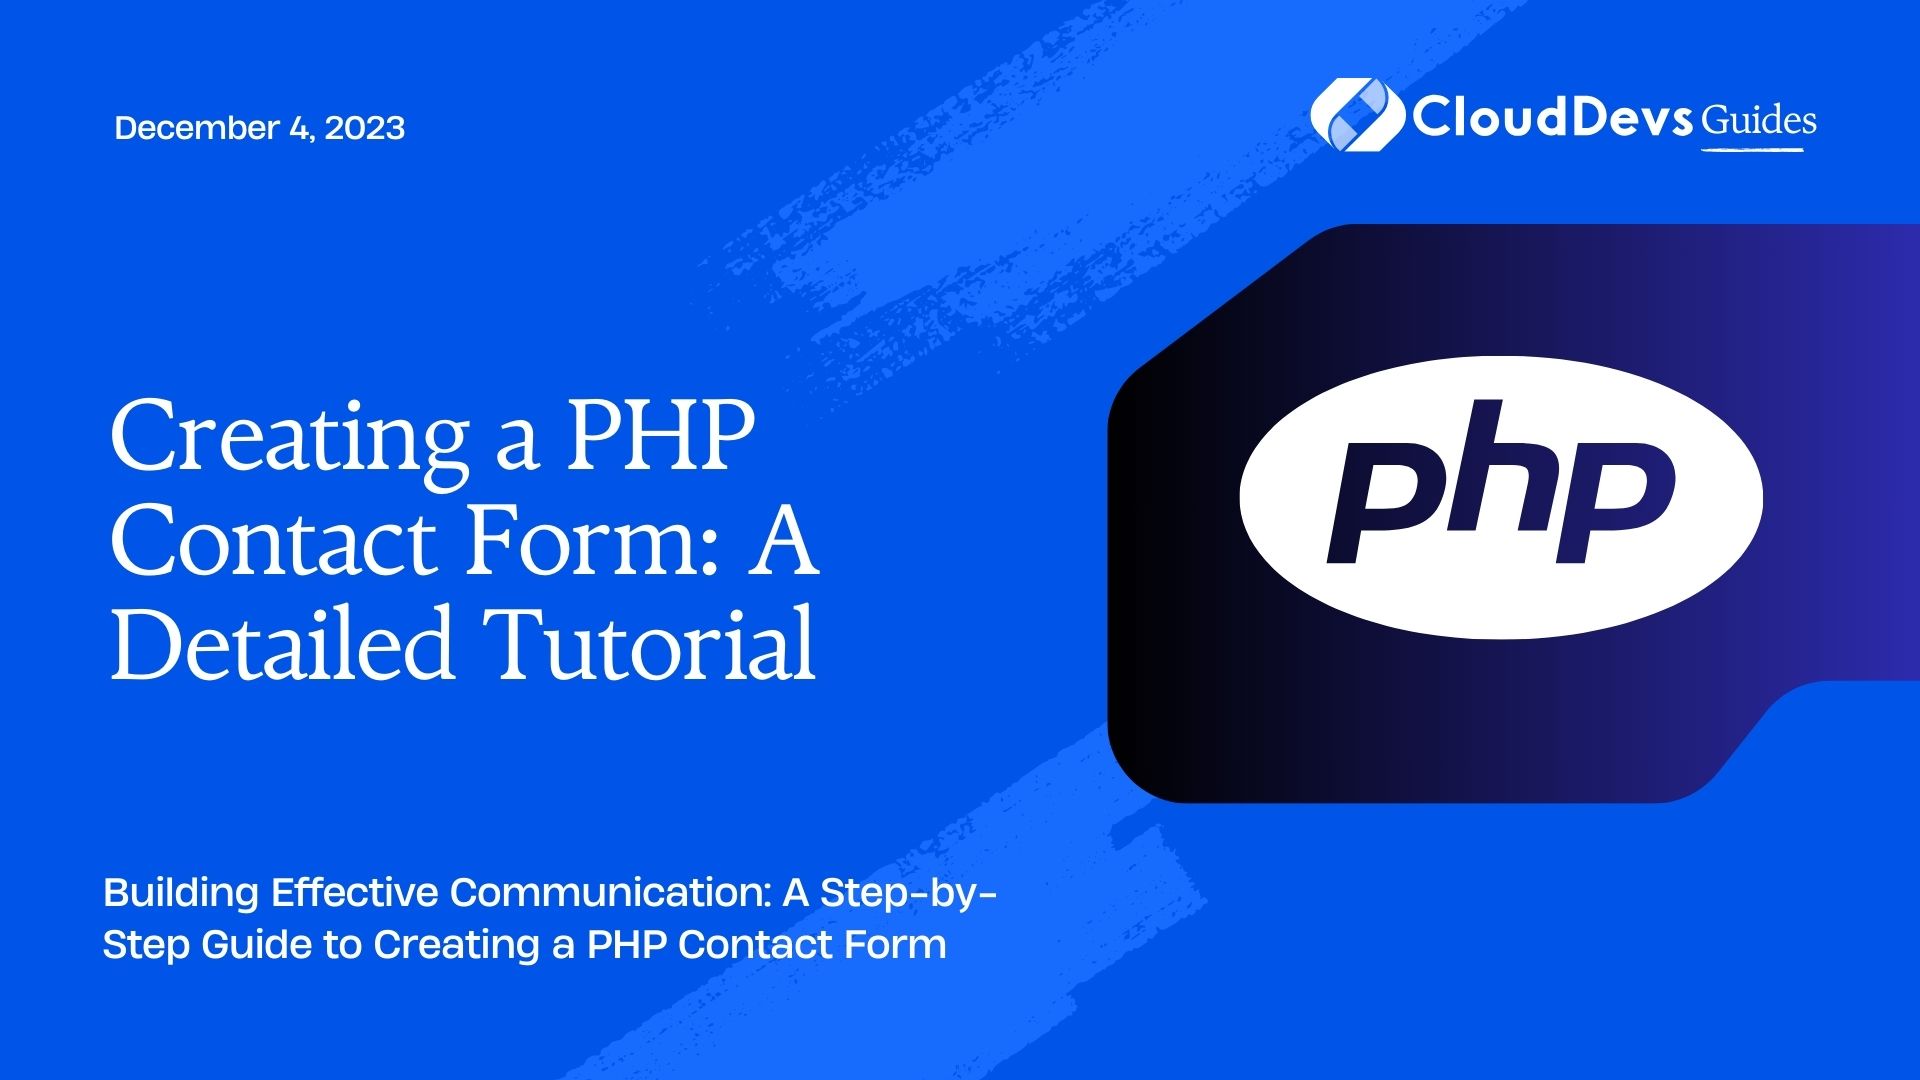 Creating a PHP Contact Form: A Detailed Tutorial